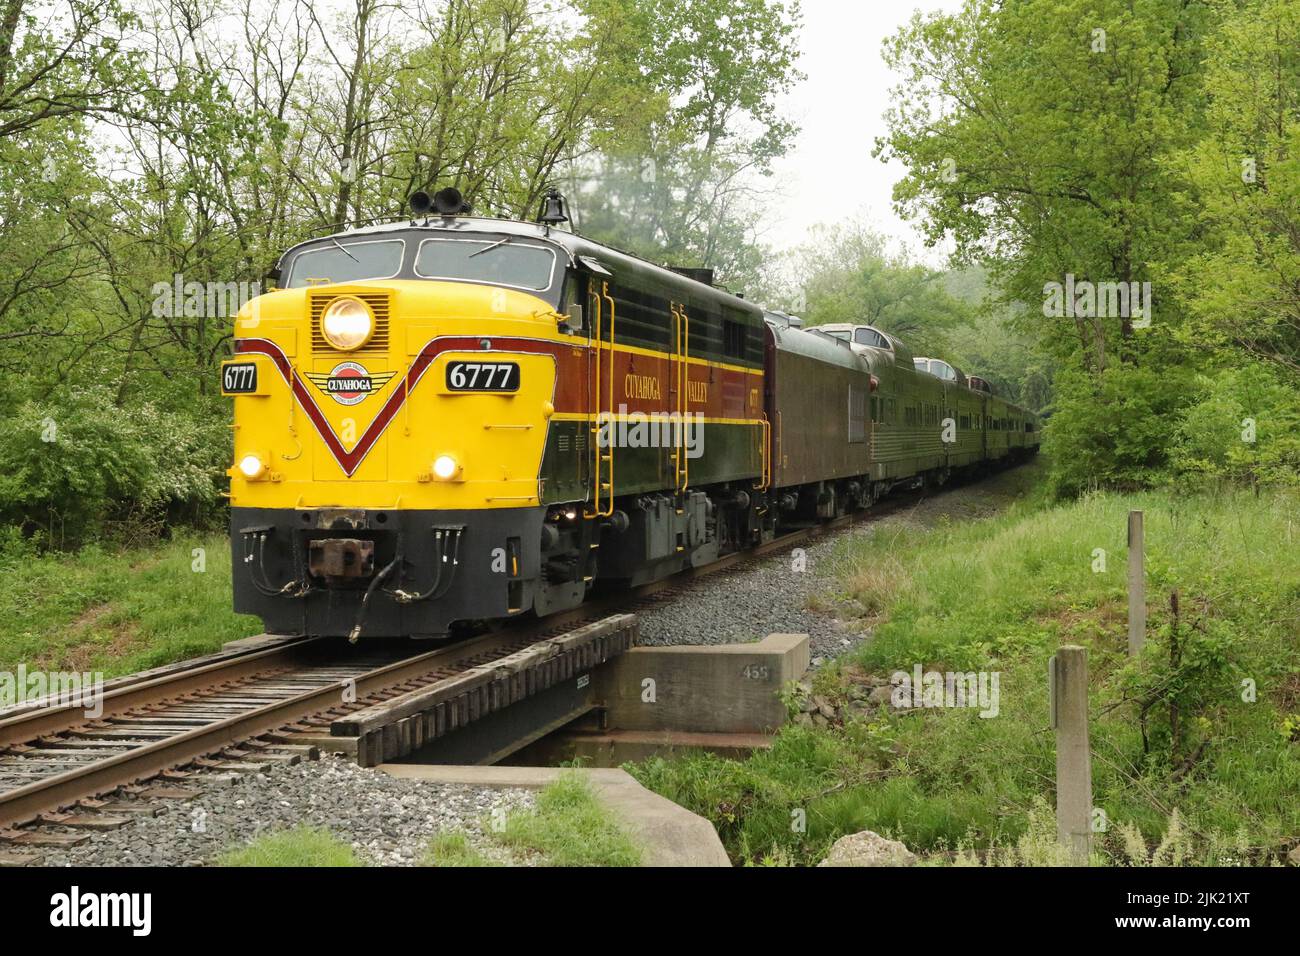 Diesel locomotive MLW/ALCOA FPA-4 number CVSR 6777. Operated as special event on the Cuyahoga Valley Scenic Railroad. Boston Mills Station, Cuyahoga V Stock Photo